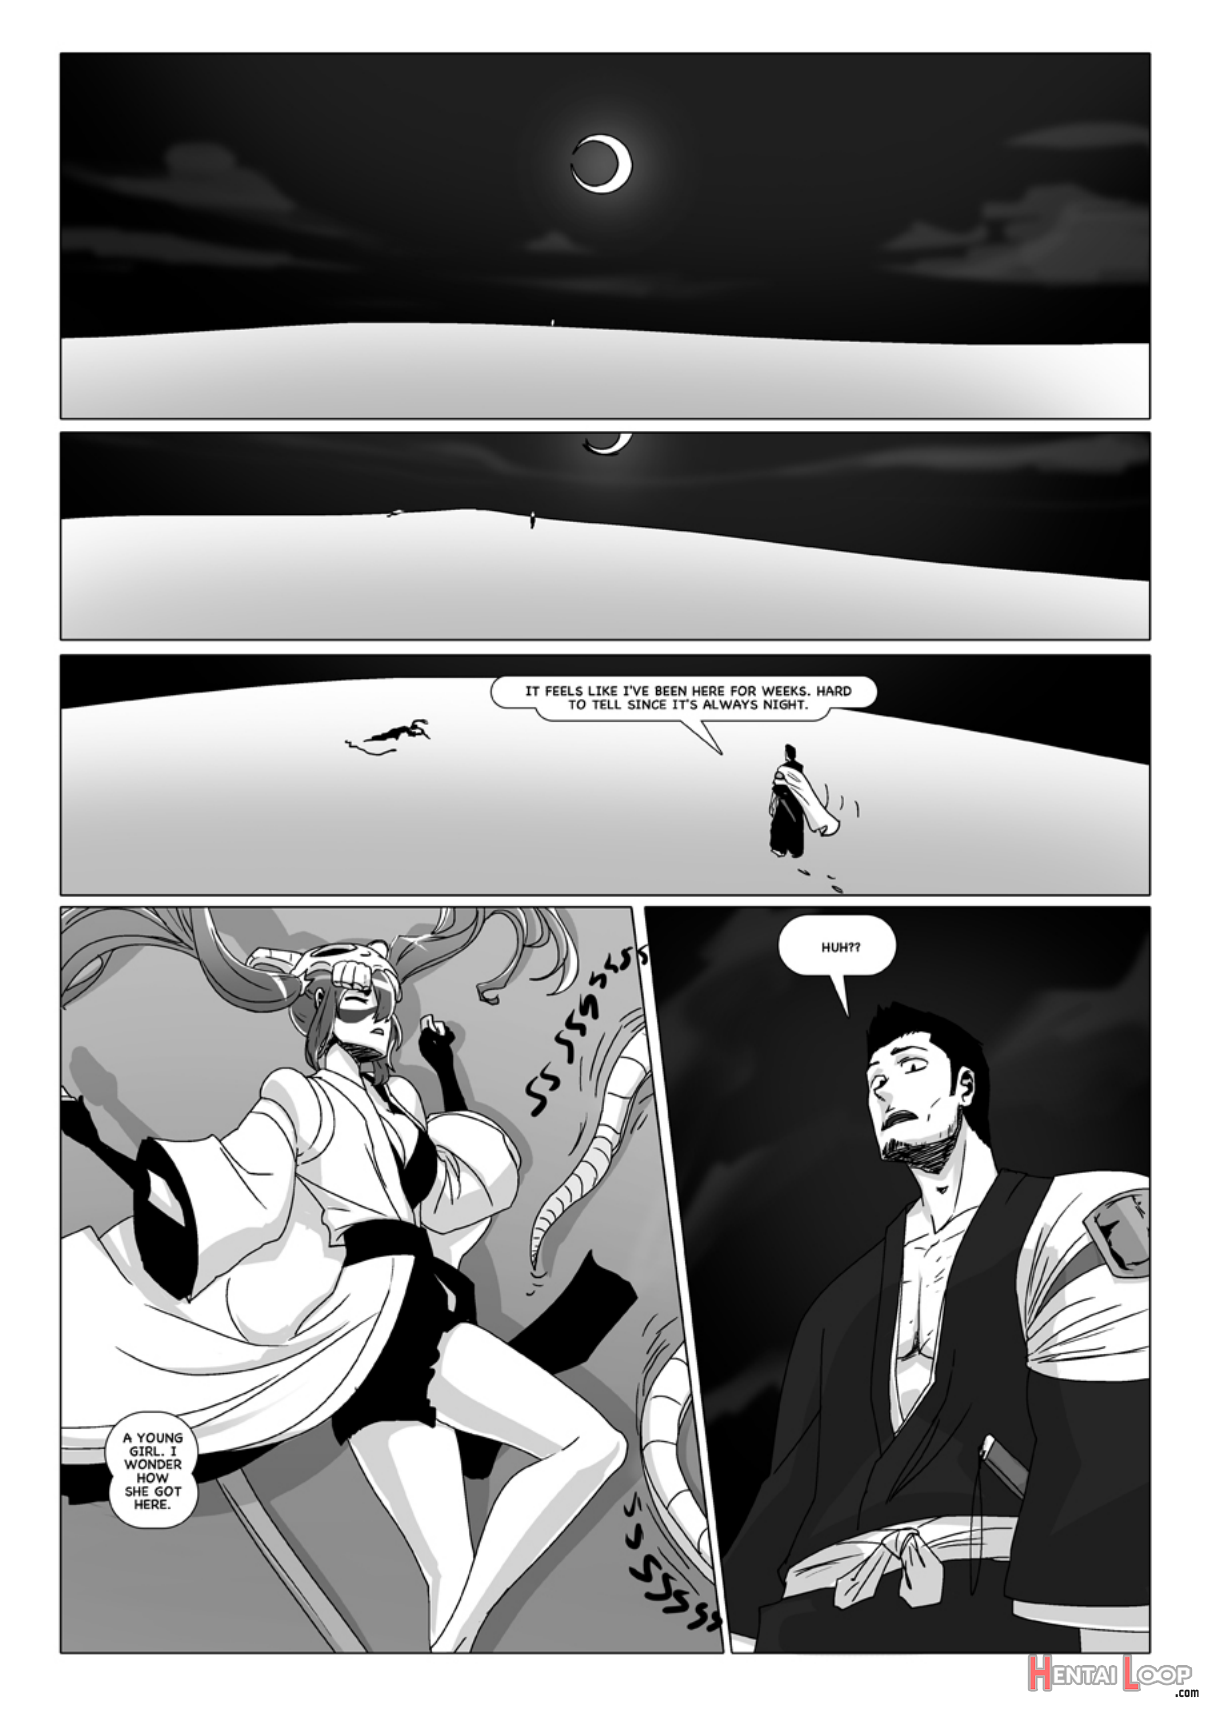 Happy To Serve You - Xxx Version page 443